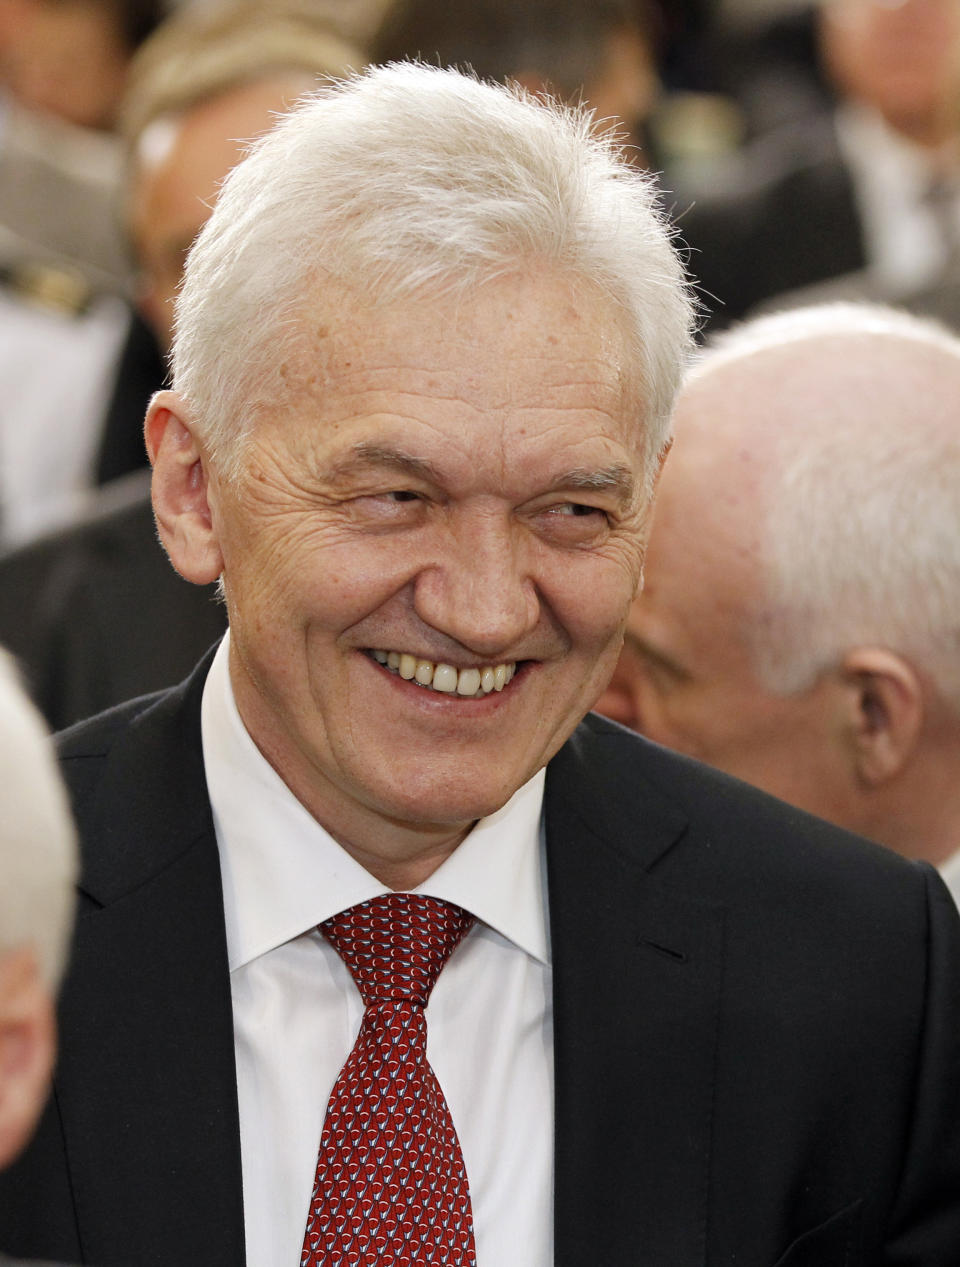 This April 30, 2013 photo, shows Russian businessman and billionaire Gennady Timchenko in St. Petersburg, Russia. U.S. President Barack Obama on Thursday, March 20, 2014 expanded U.S. economic sanctions against Moscow over its actions in Ukraine, targeting President Vladimir Putin's chief of staff and 19 other individuals as well as a Russian bank that provides them support. Those named in the sanctions Thursday include Timchenko, lifelong Putin friend whose company has amassed billions of dollars in government contracts. (AP Photo/Interpress, Alexander Nikolayev)